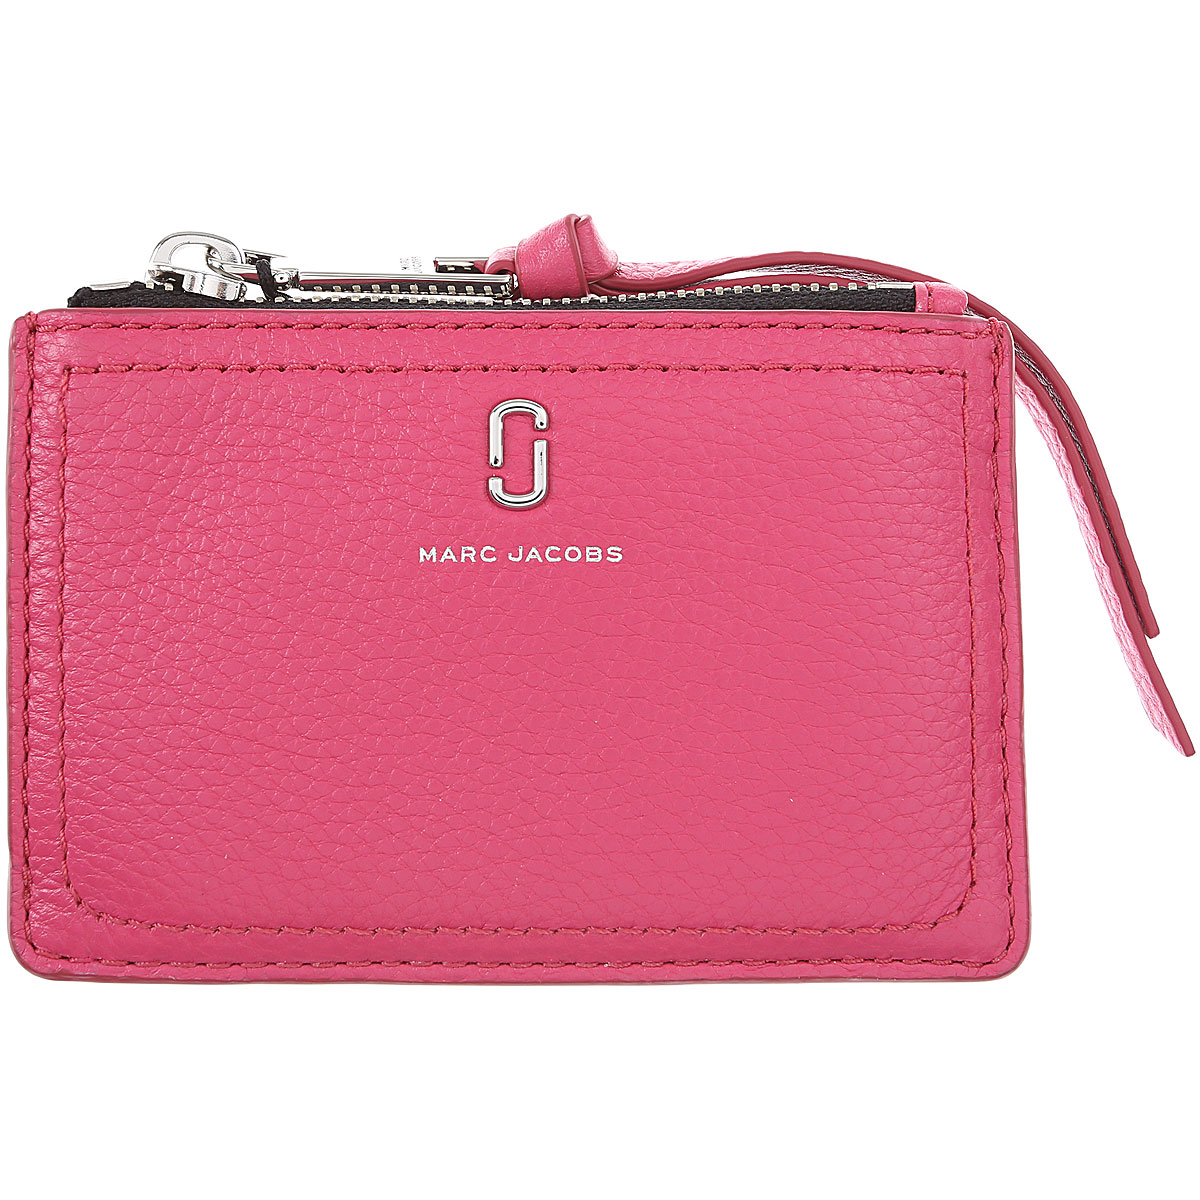 Womens Wallets Marc Jacobs, Style code: m0015123-658-